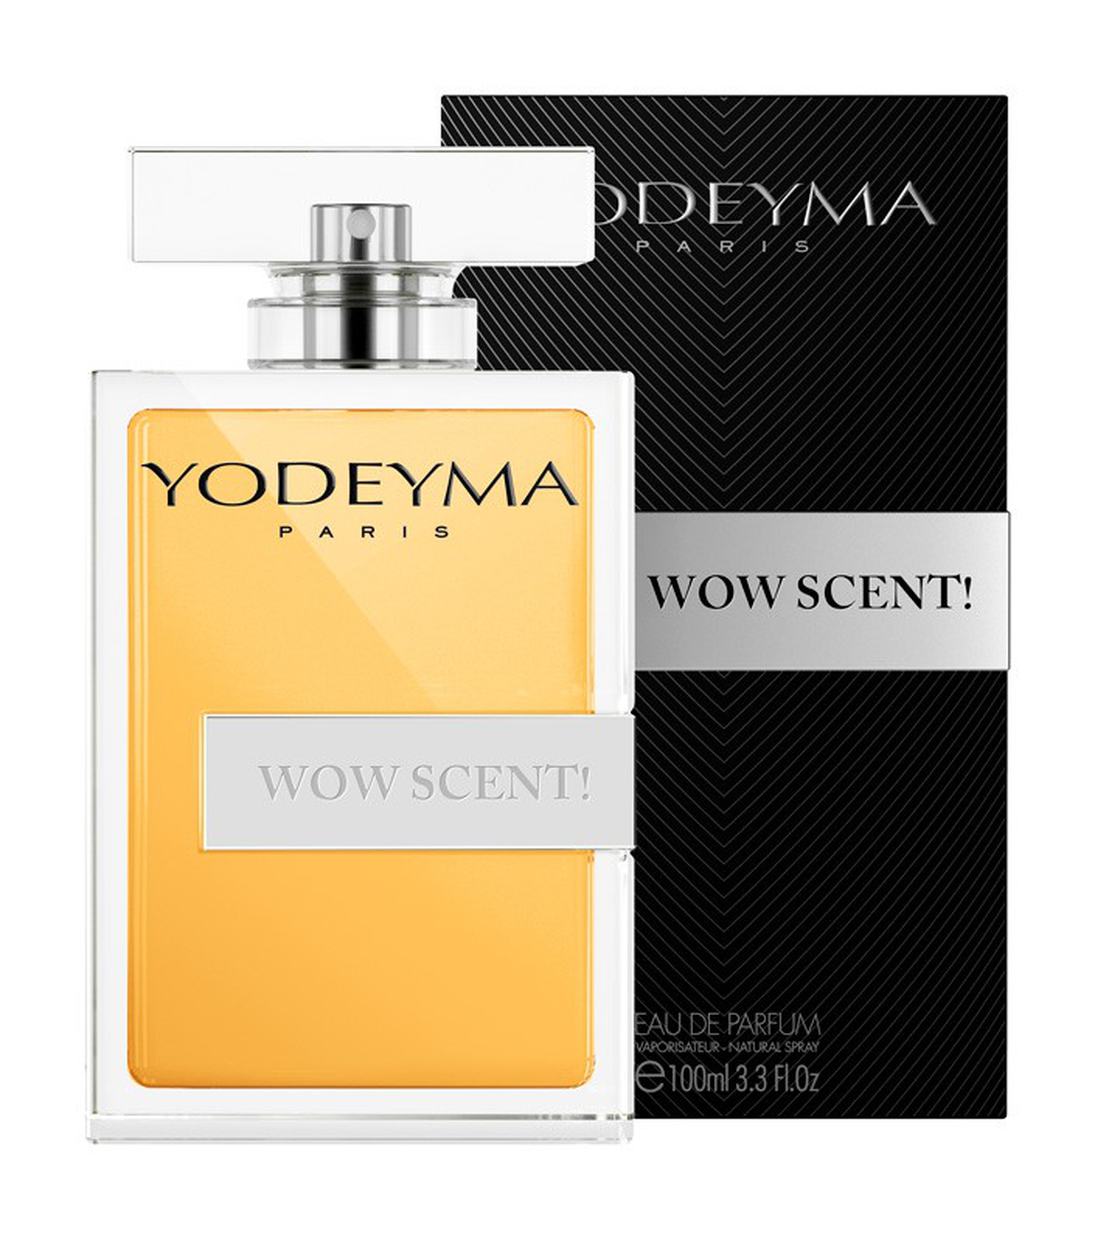 WOW SCENT! 15ml